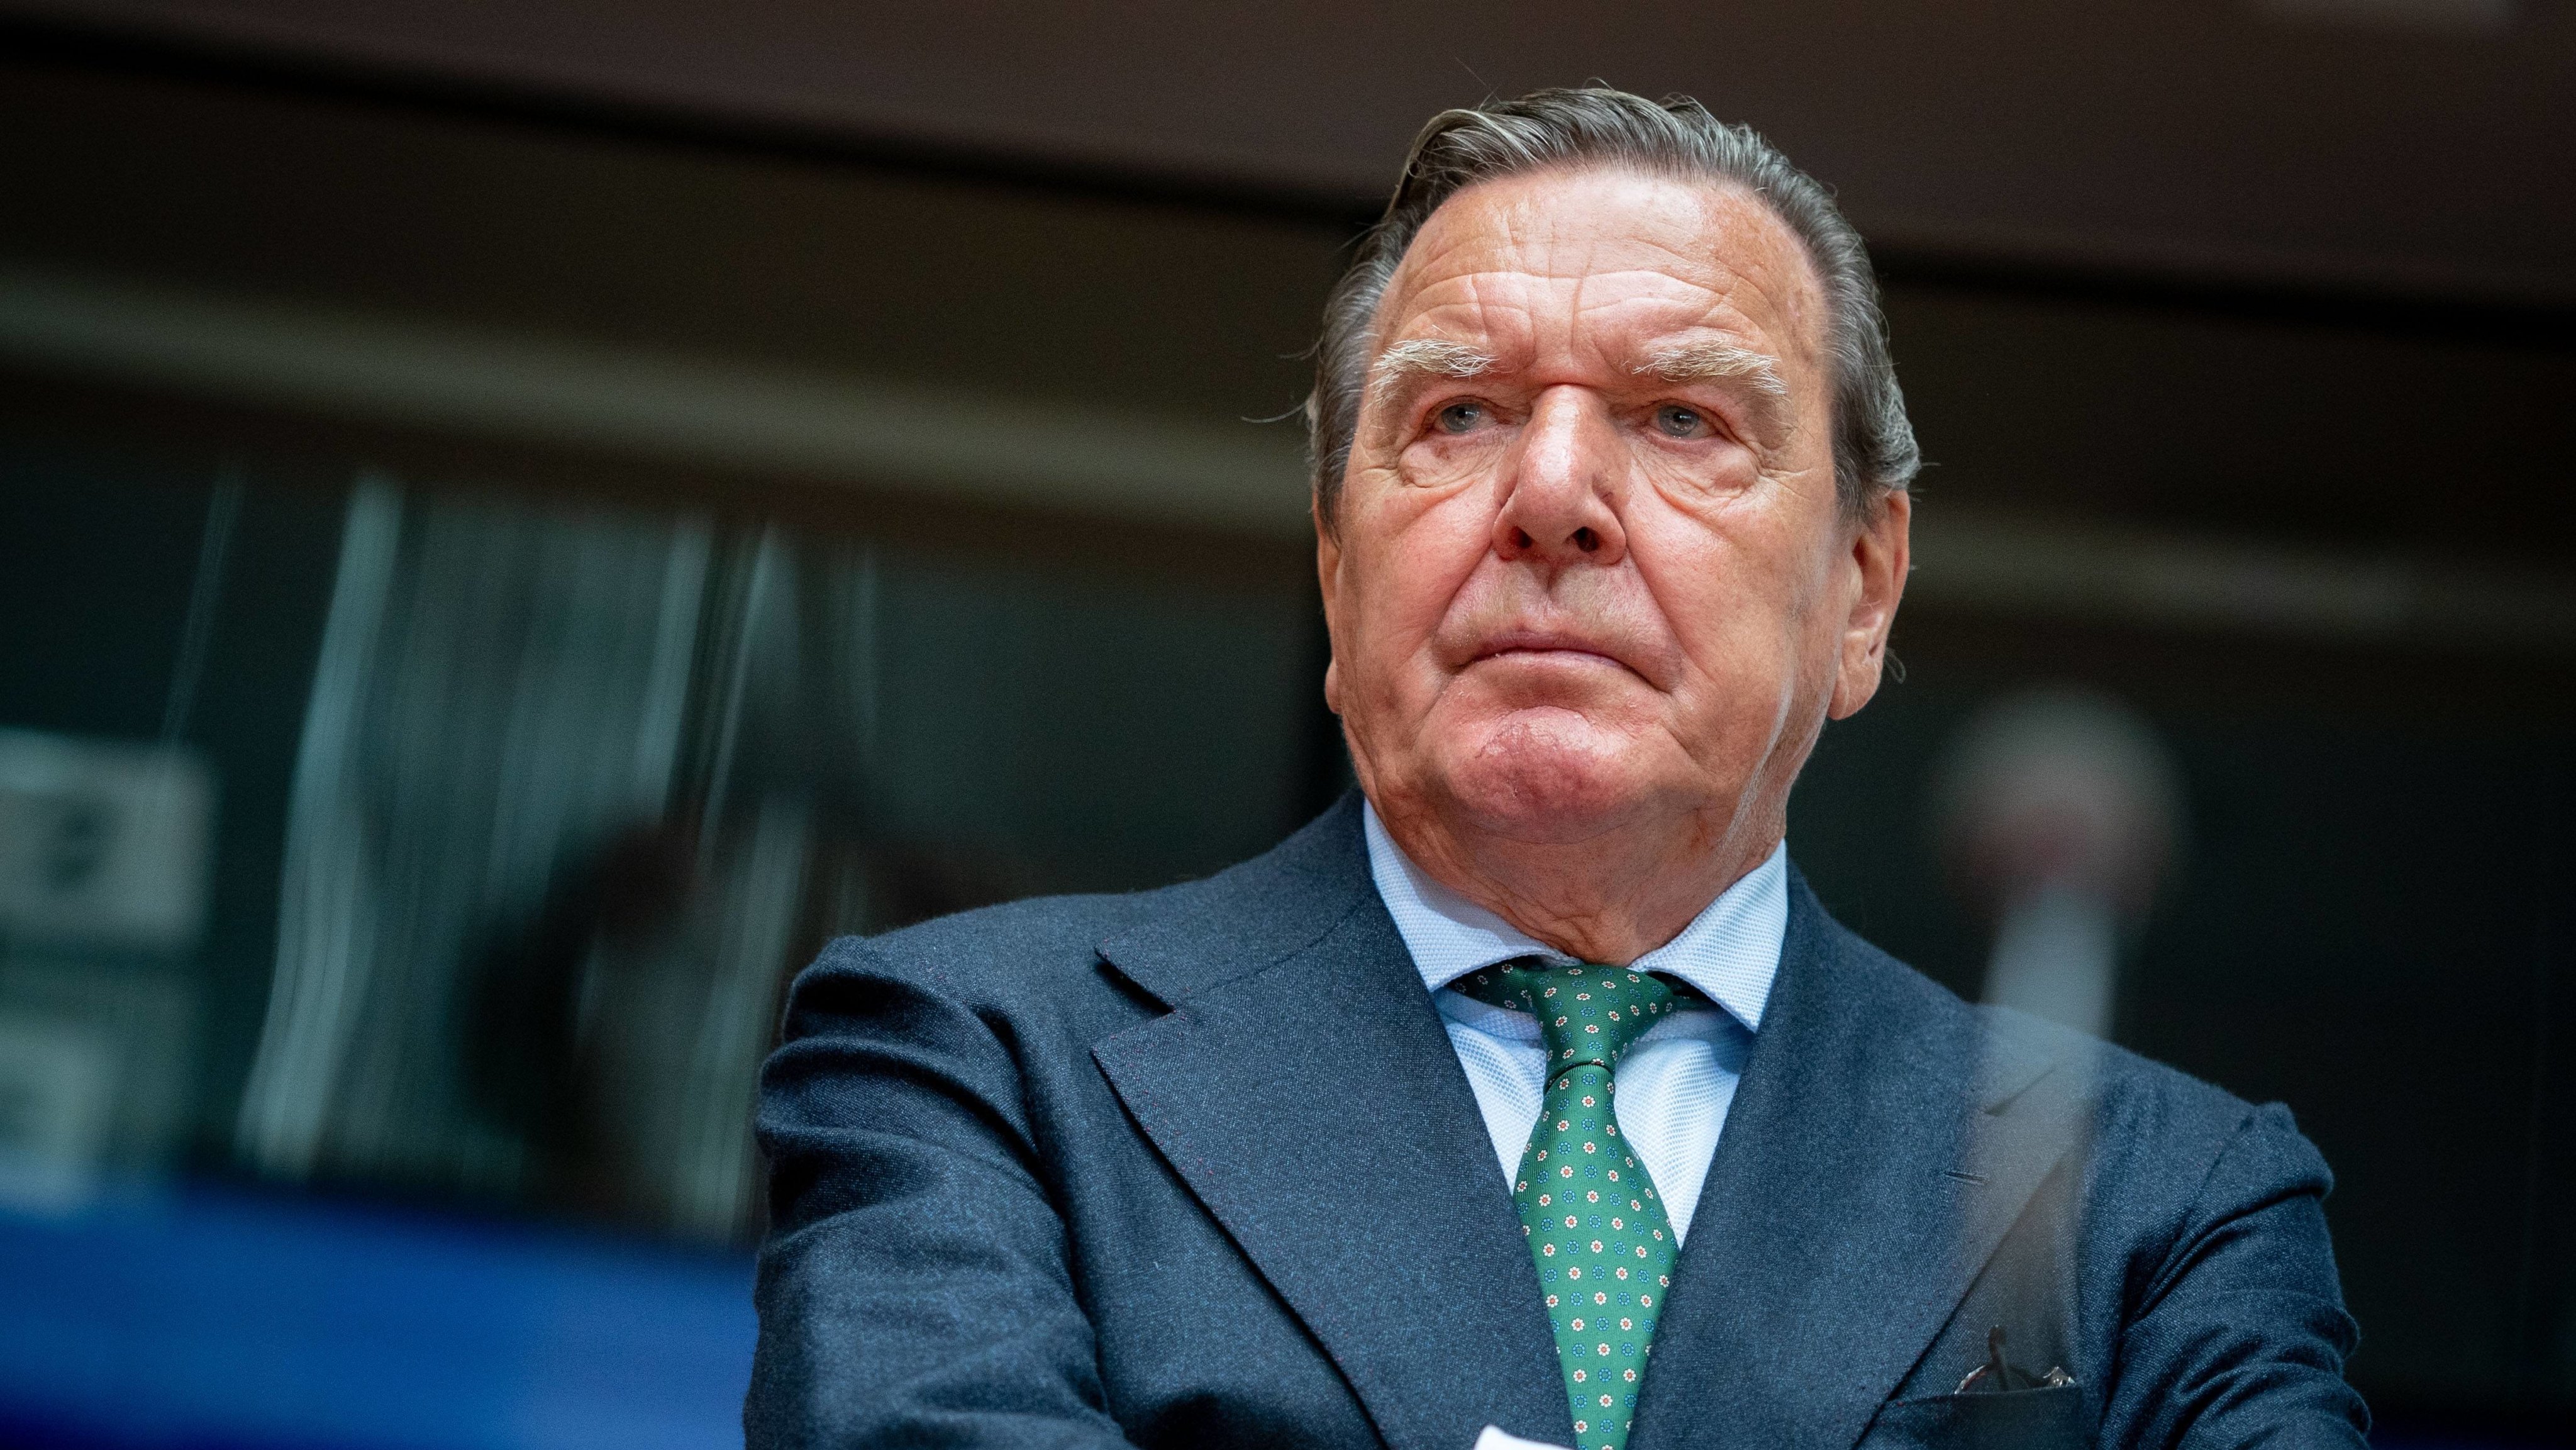 Ex-Chancellor Schröder at hearing in the Economic Committee